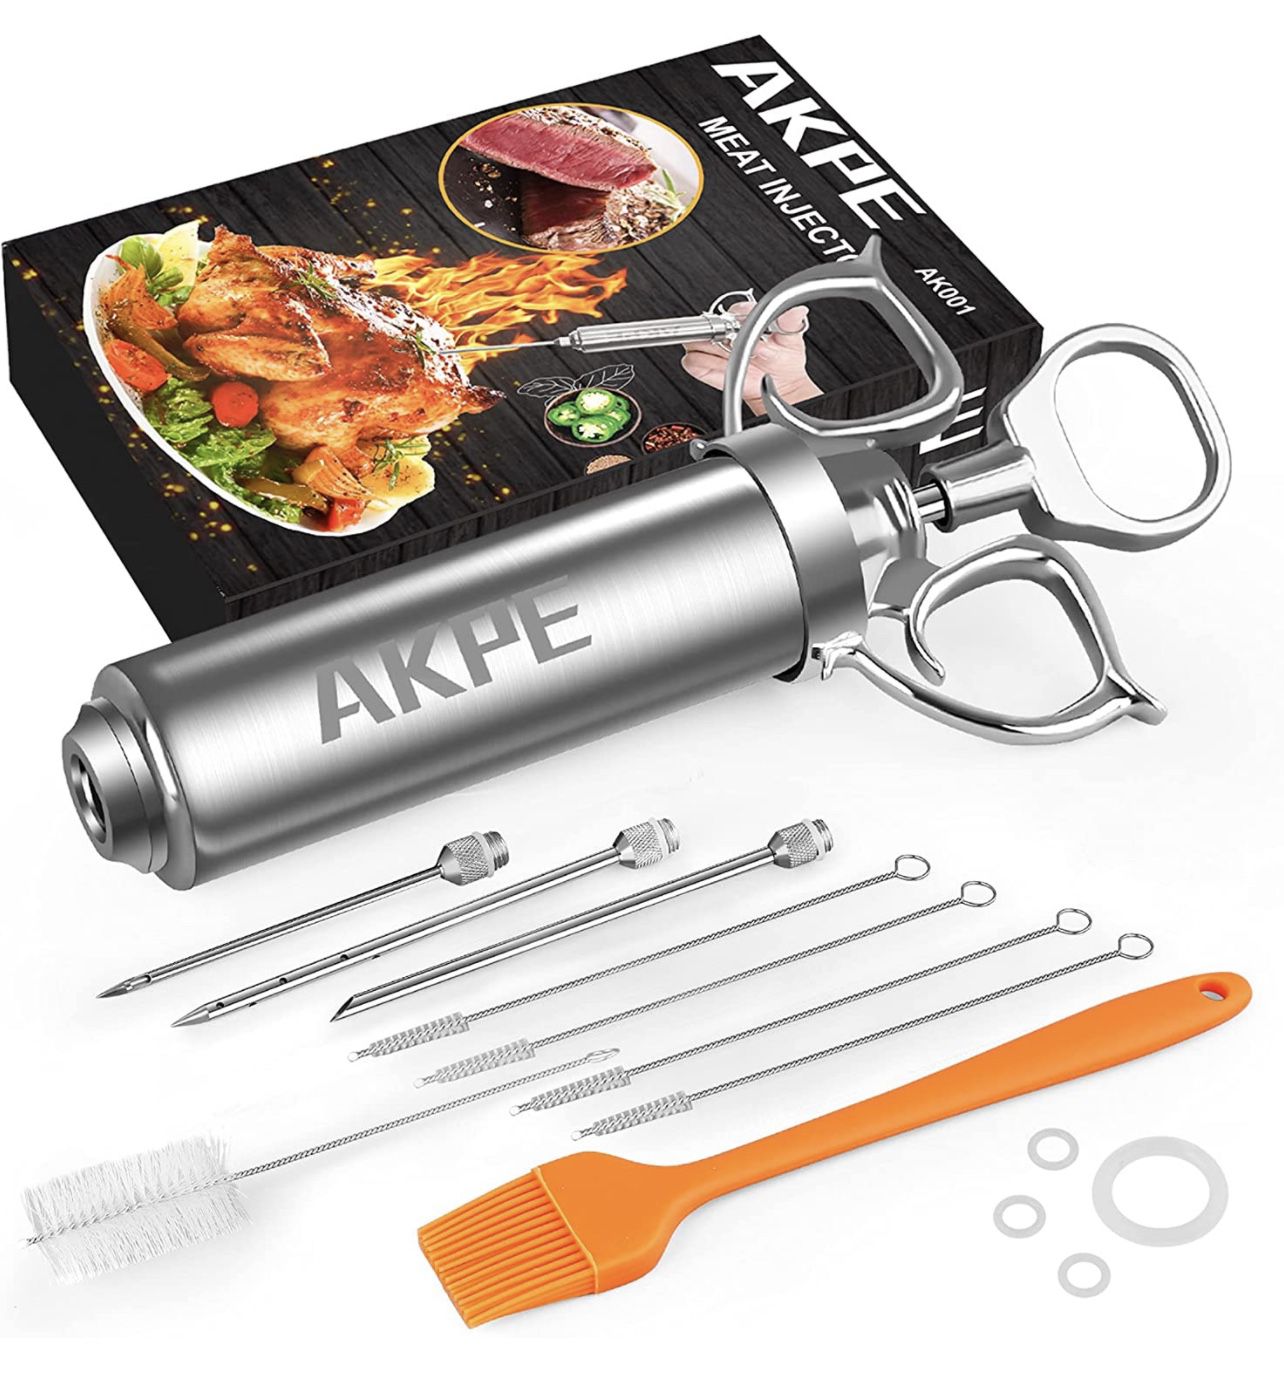 AKPE Meat Injector, Stainless Steel Marinade injector Syringe for BBQ Grill and Turkey, 2 Ounce Syringe with 3 Needles, Easy to Use and Clean (Without